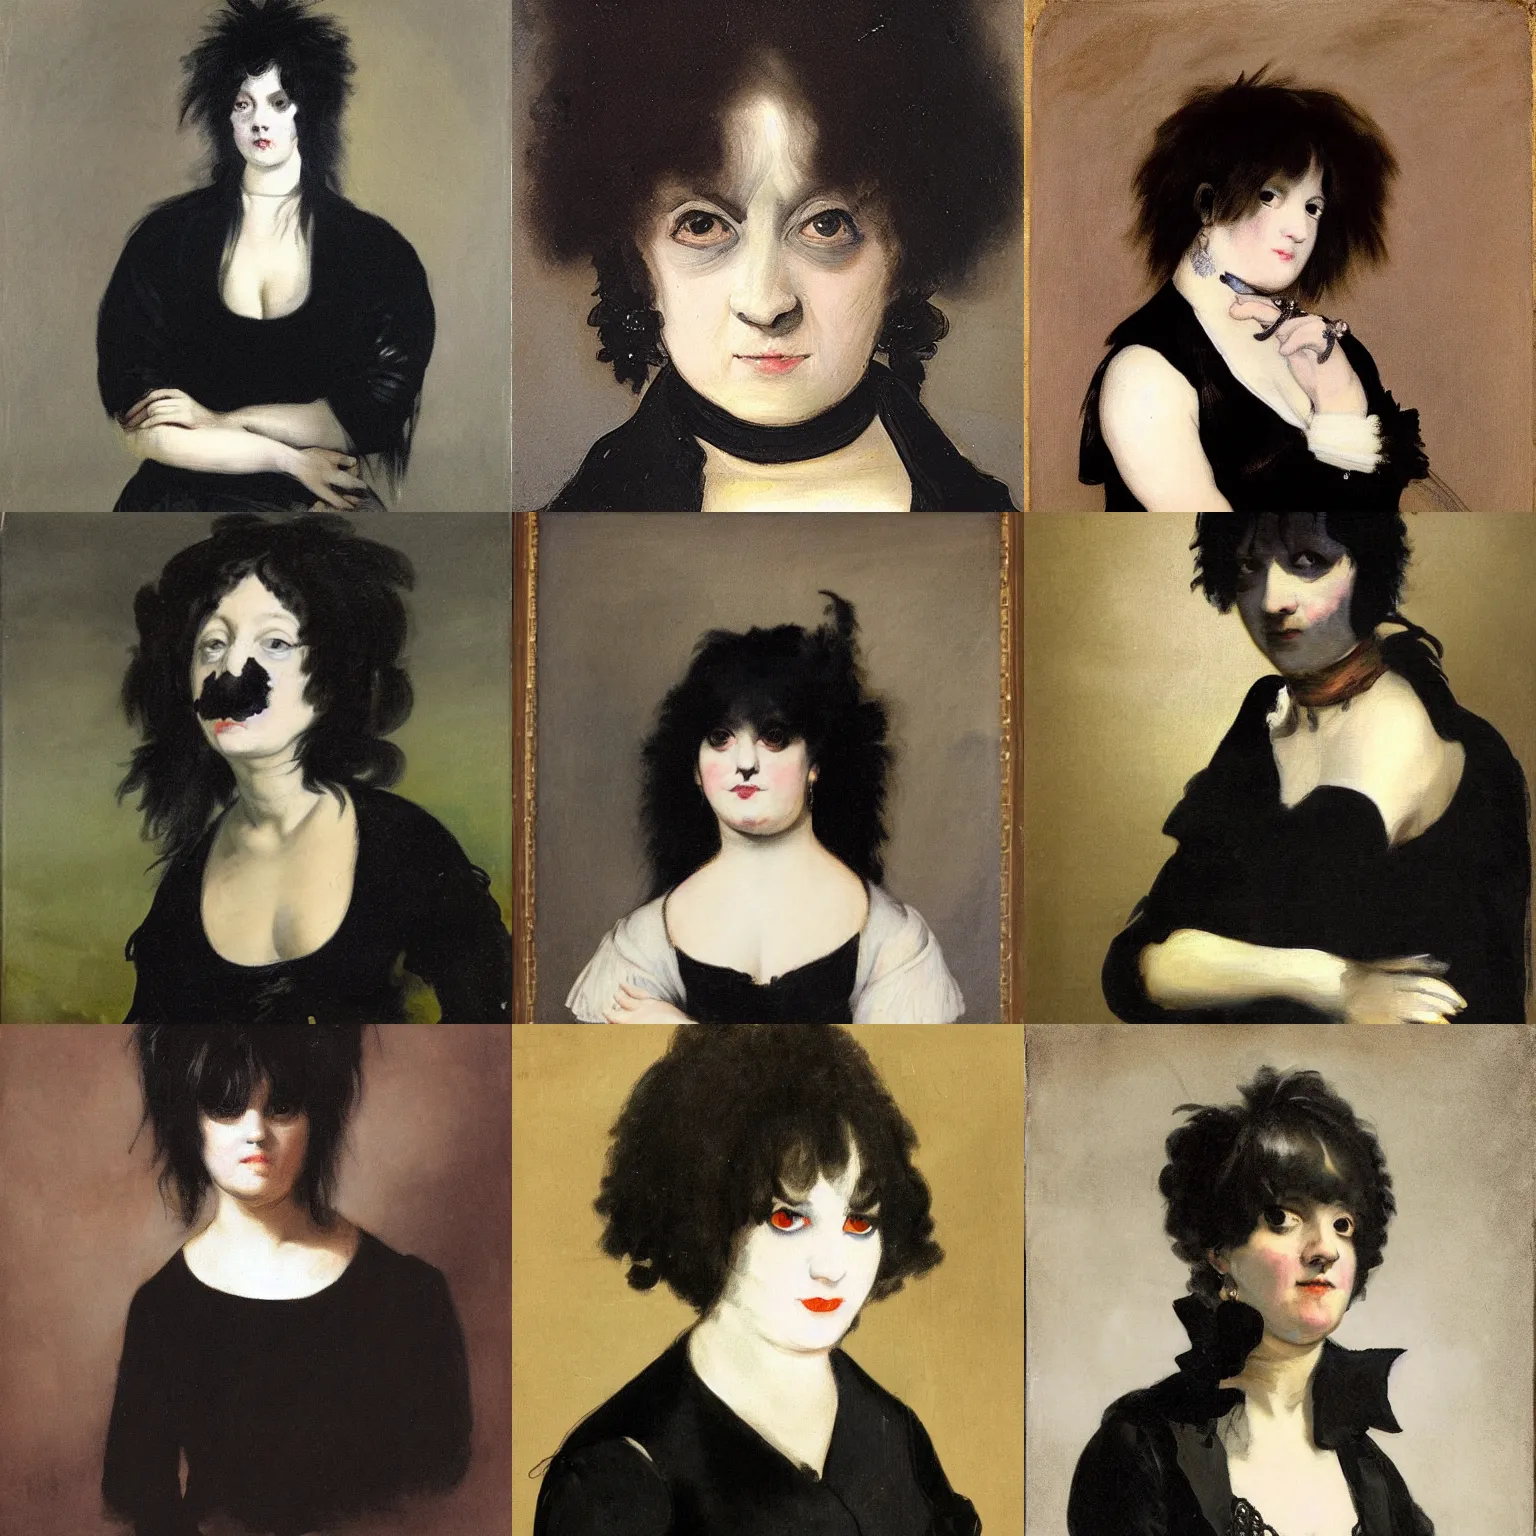 Prompt: A goth portrait painted by Francisco Goya. Her hair is dark brown and cut into a short, messy pixie cut. She has a slightly rounded face, with a pointed chin, large entirely-black eyes, and a small nose. She is wearing a black tank top, a black leather jacket, a black knee-length skirt, a black choker, and black leather boots.